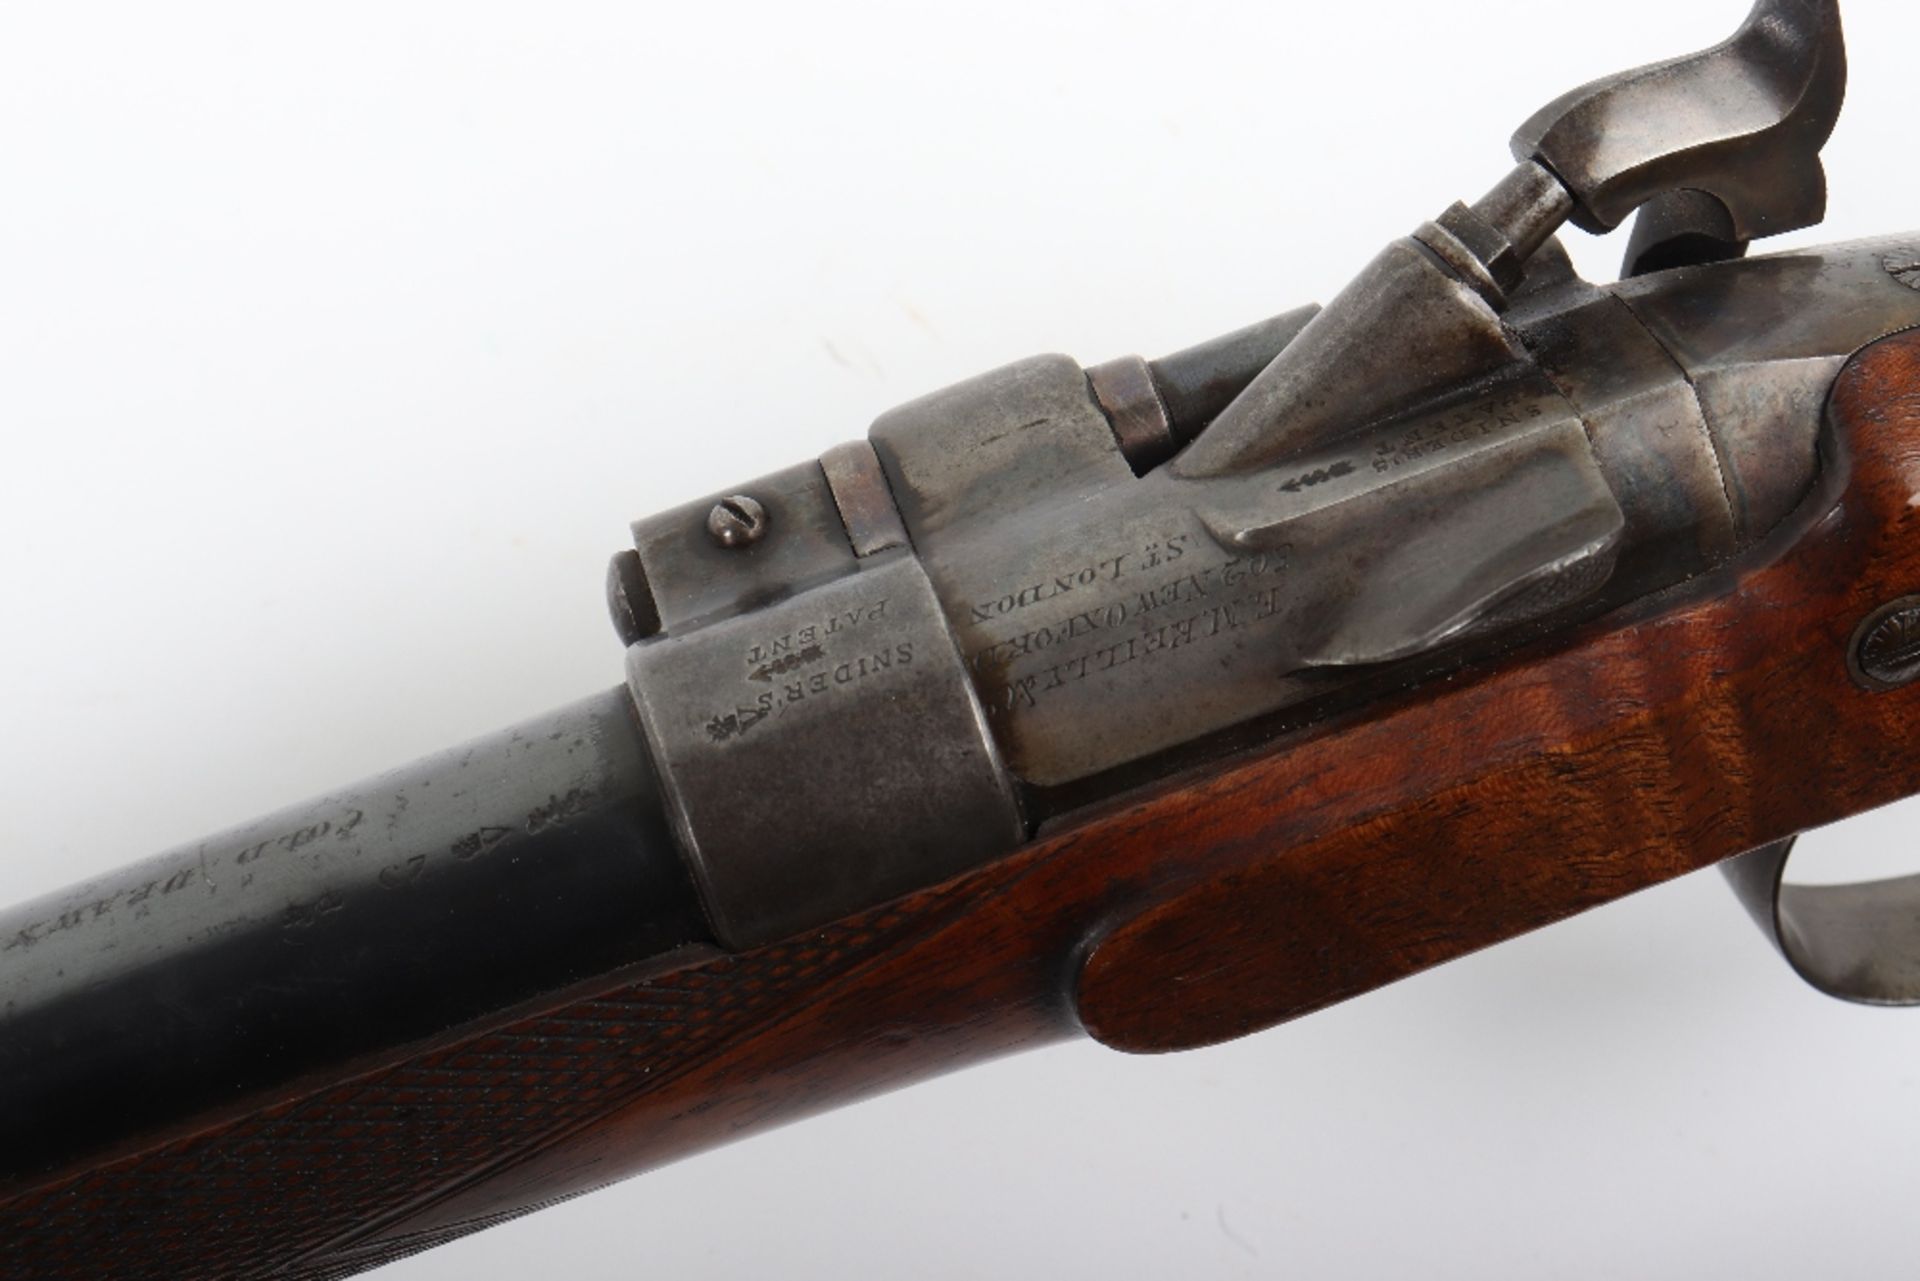 25-Bore Snider Action Breech Loading Sporting Rifle by Reilly No. 15227 - Image 14 of 14